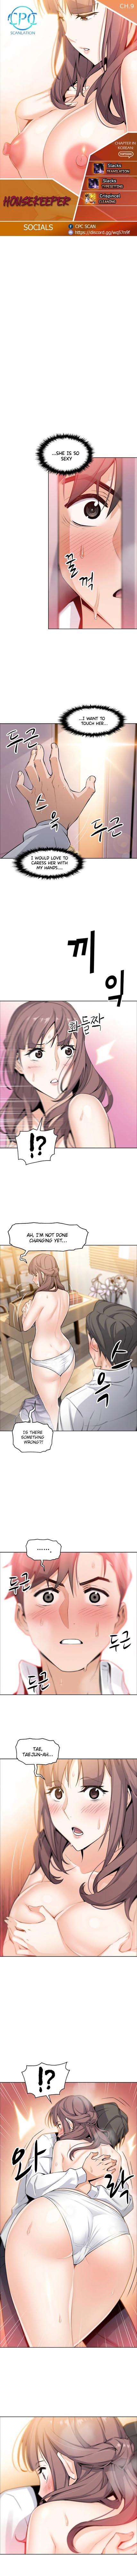 Housekeeper [Neck Pillow, Paper] Ch.49/49 [English] [Manhwa PDF] Completed 93